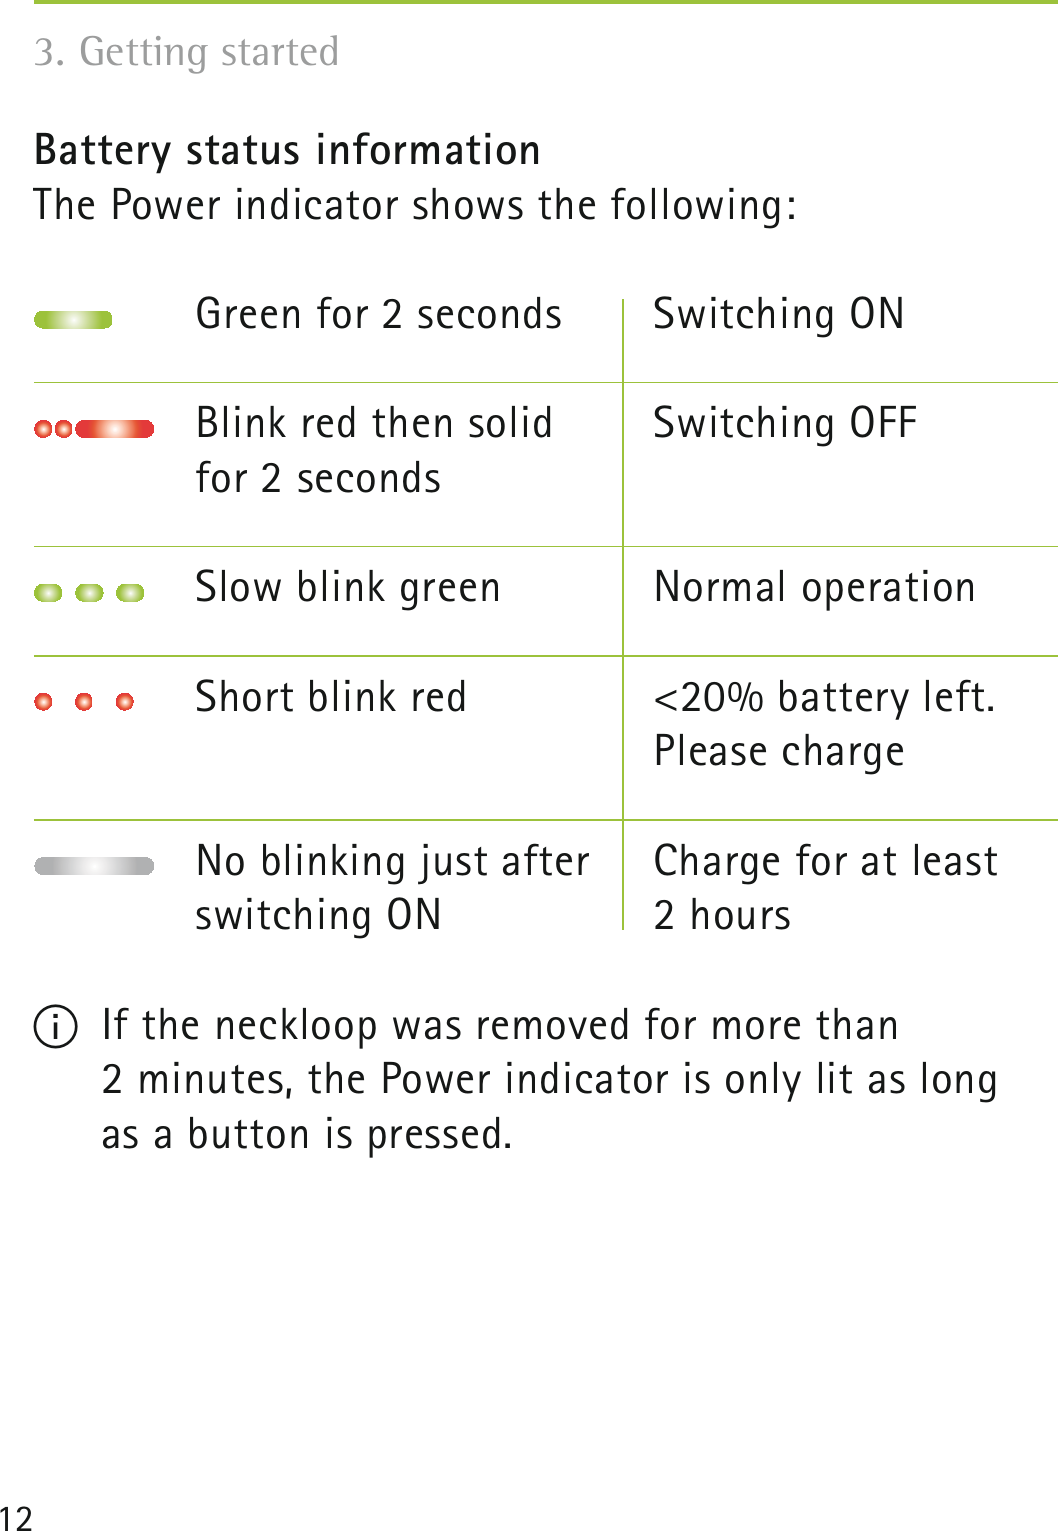 123. Getting started Battery status informationThe Power indicator shows the following:  Green for 2 seconds Blink red then solid   for 2 seconds Slow blink green  Short blink red   No blinking just after  switching ON I  If the neckloop was removed for more than  2 minutes, the Power indicator is only lit as long  as a button is pressed.Switching ONSwitching OFFNormal operation&lt;20% battery left. Please chargeCharge for at least 2 hours